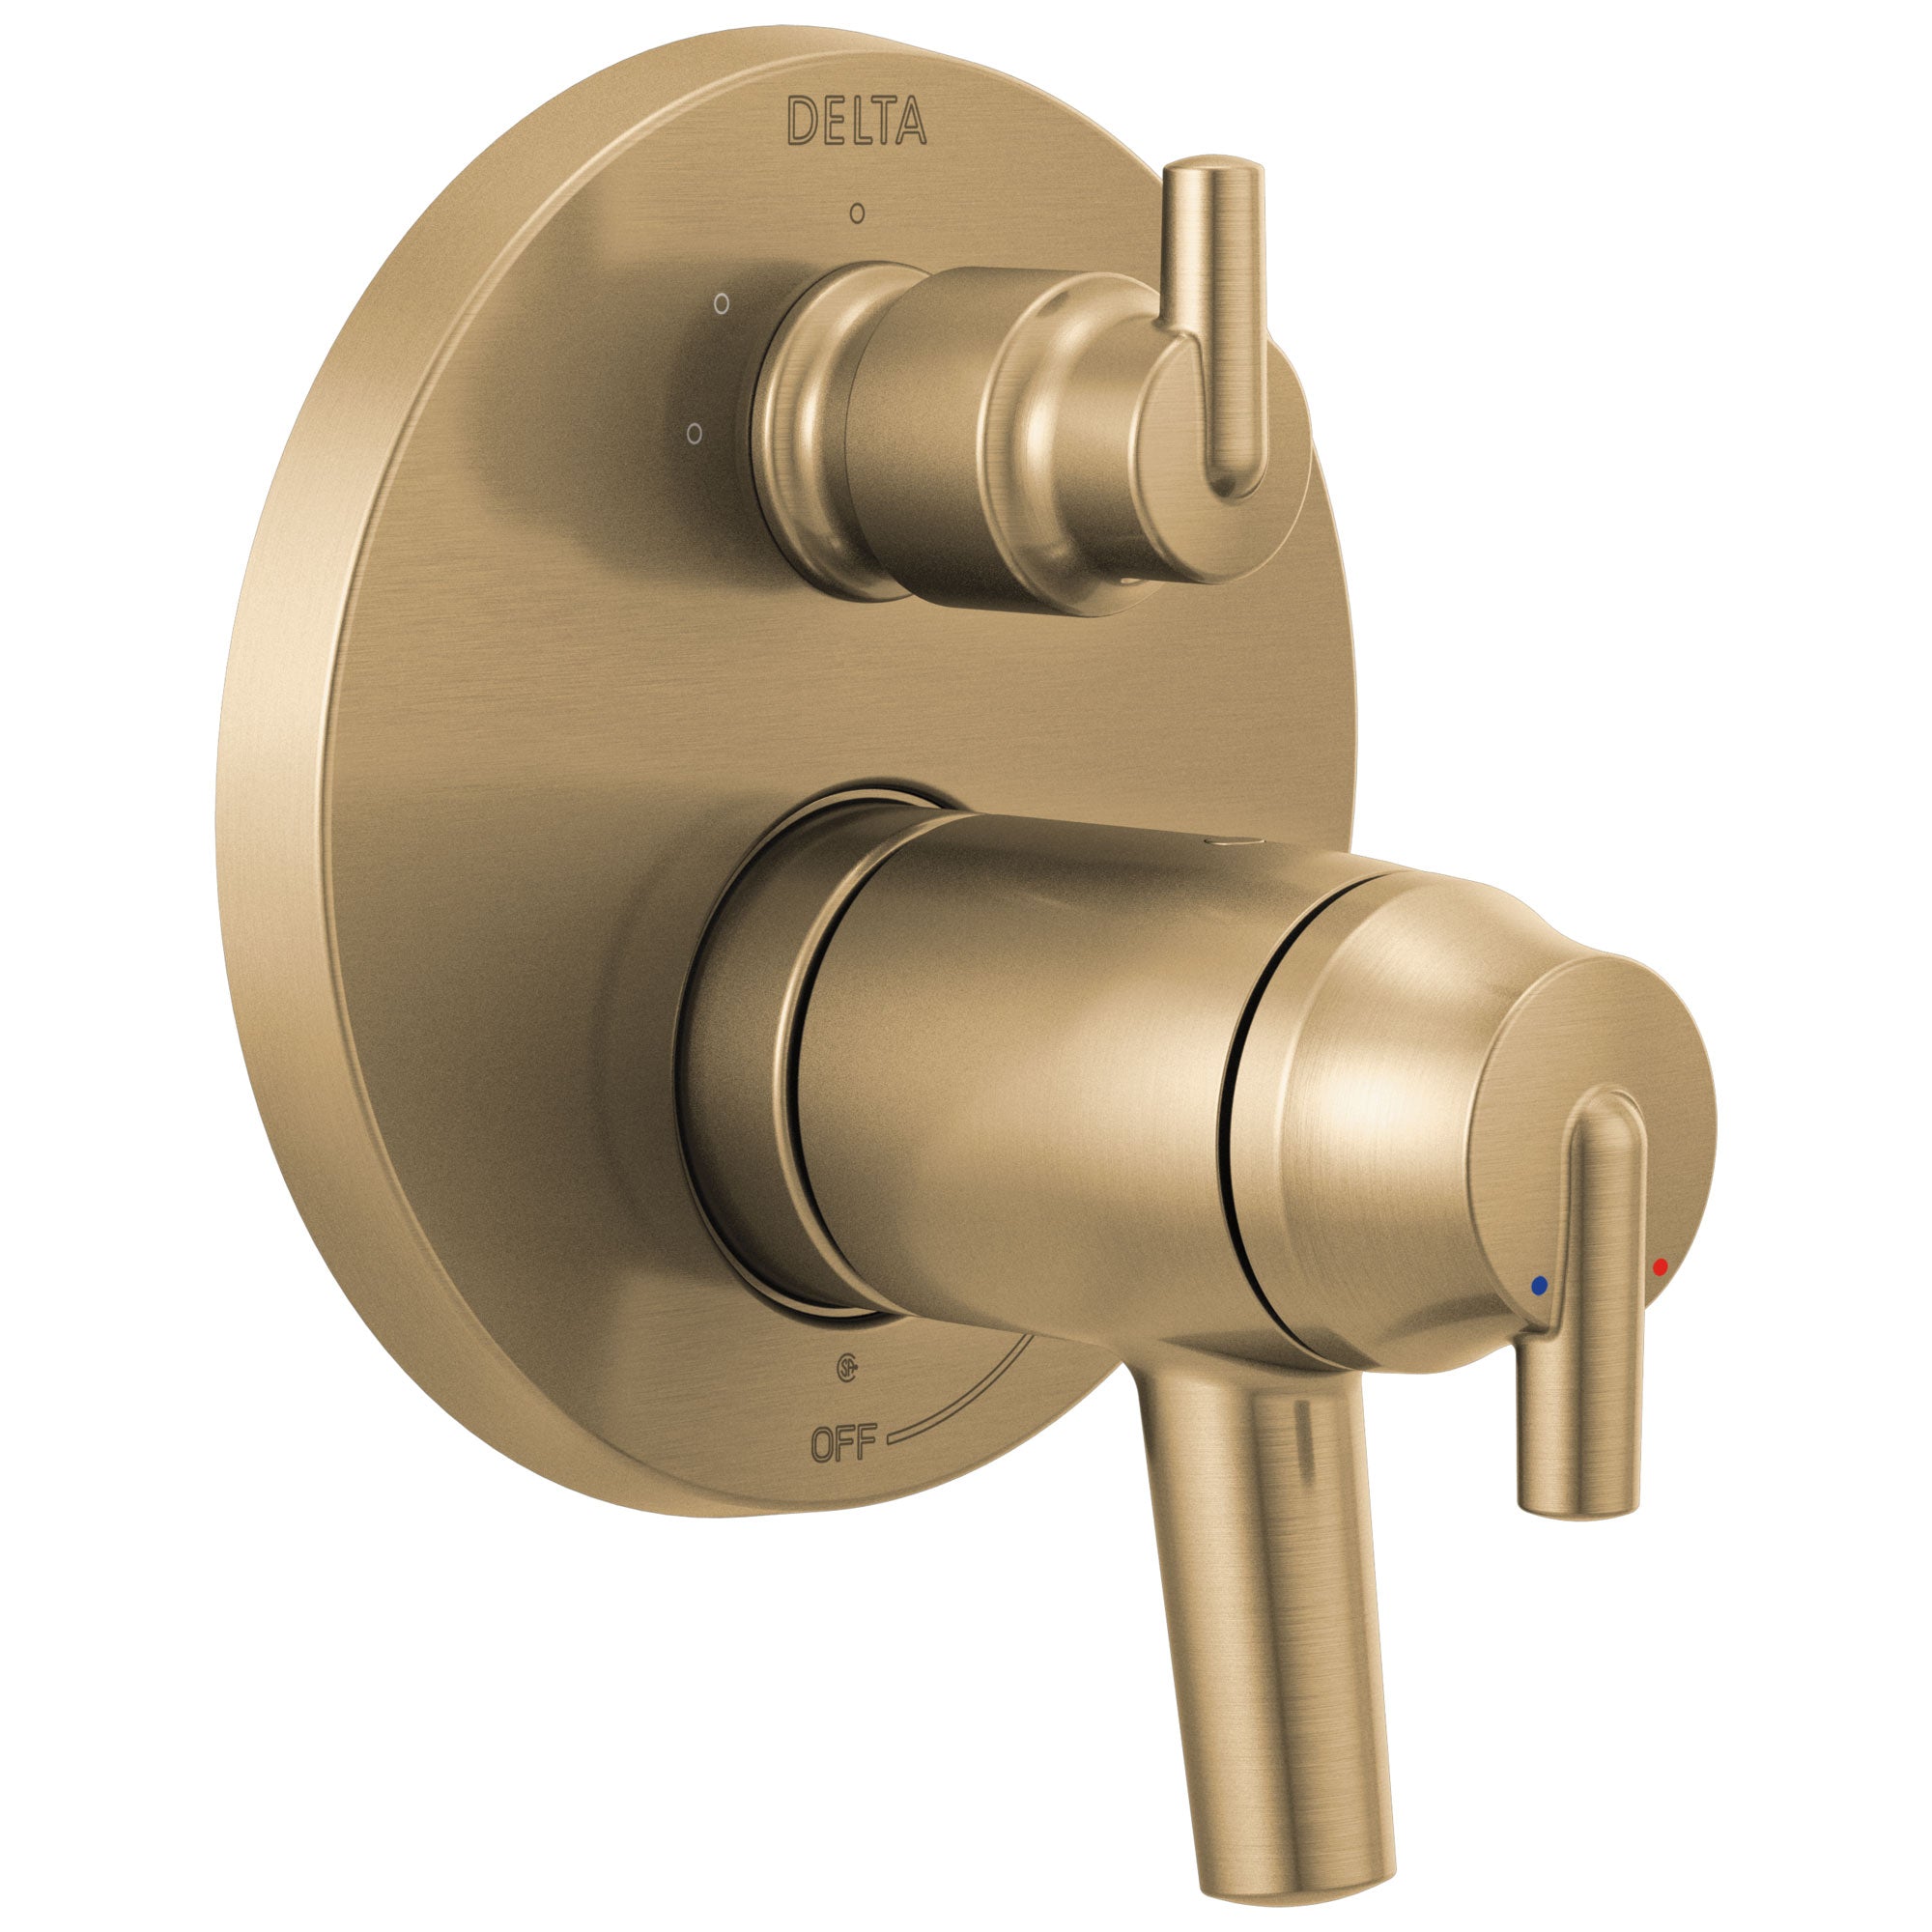 Delta Trinsic Champagne Bronze Finish Modern Thermostatic Shower Faucet Control with 3-Setting Integrated Diverter Includes Valve and Handles D3107V